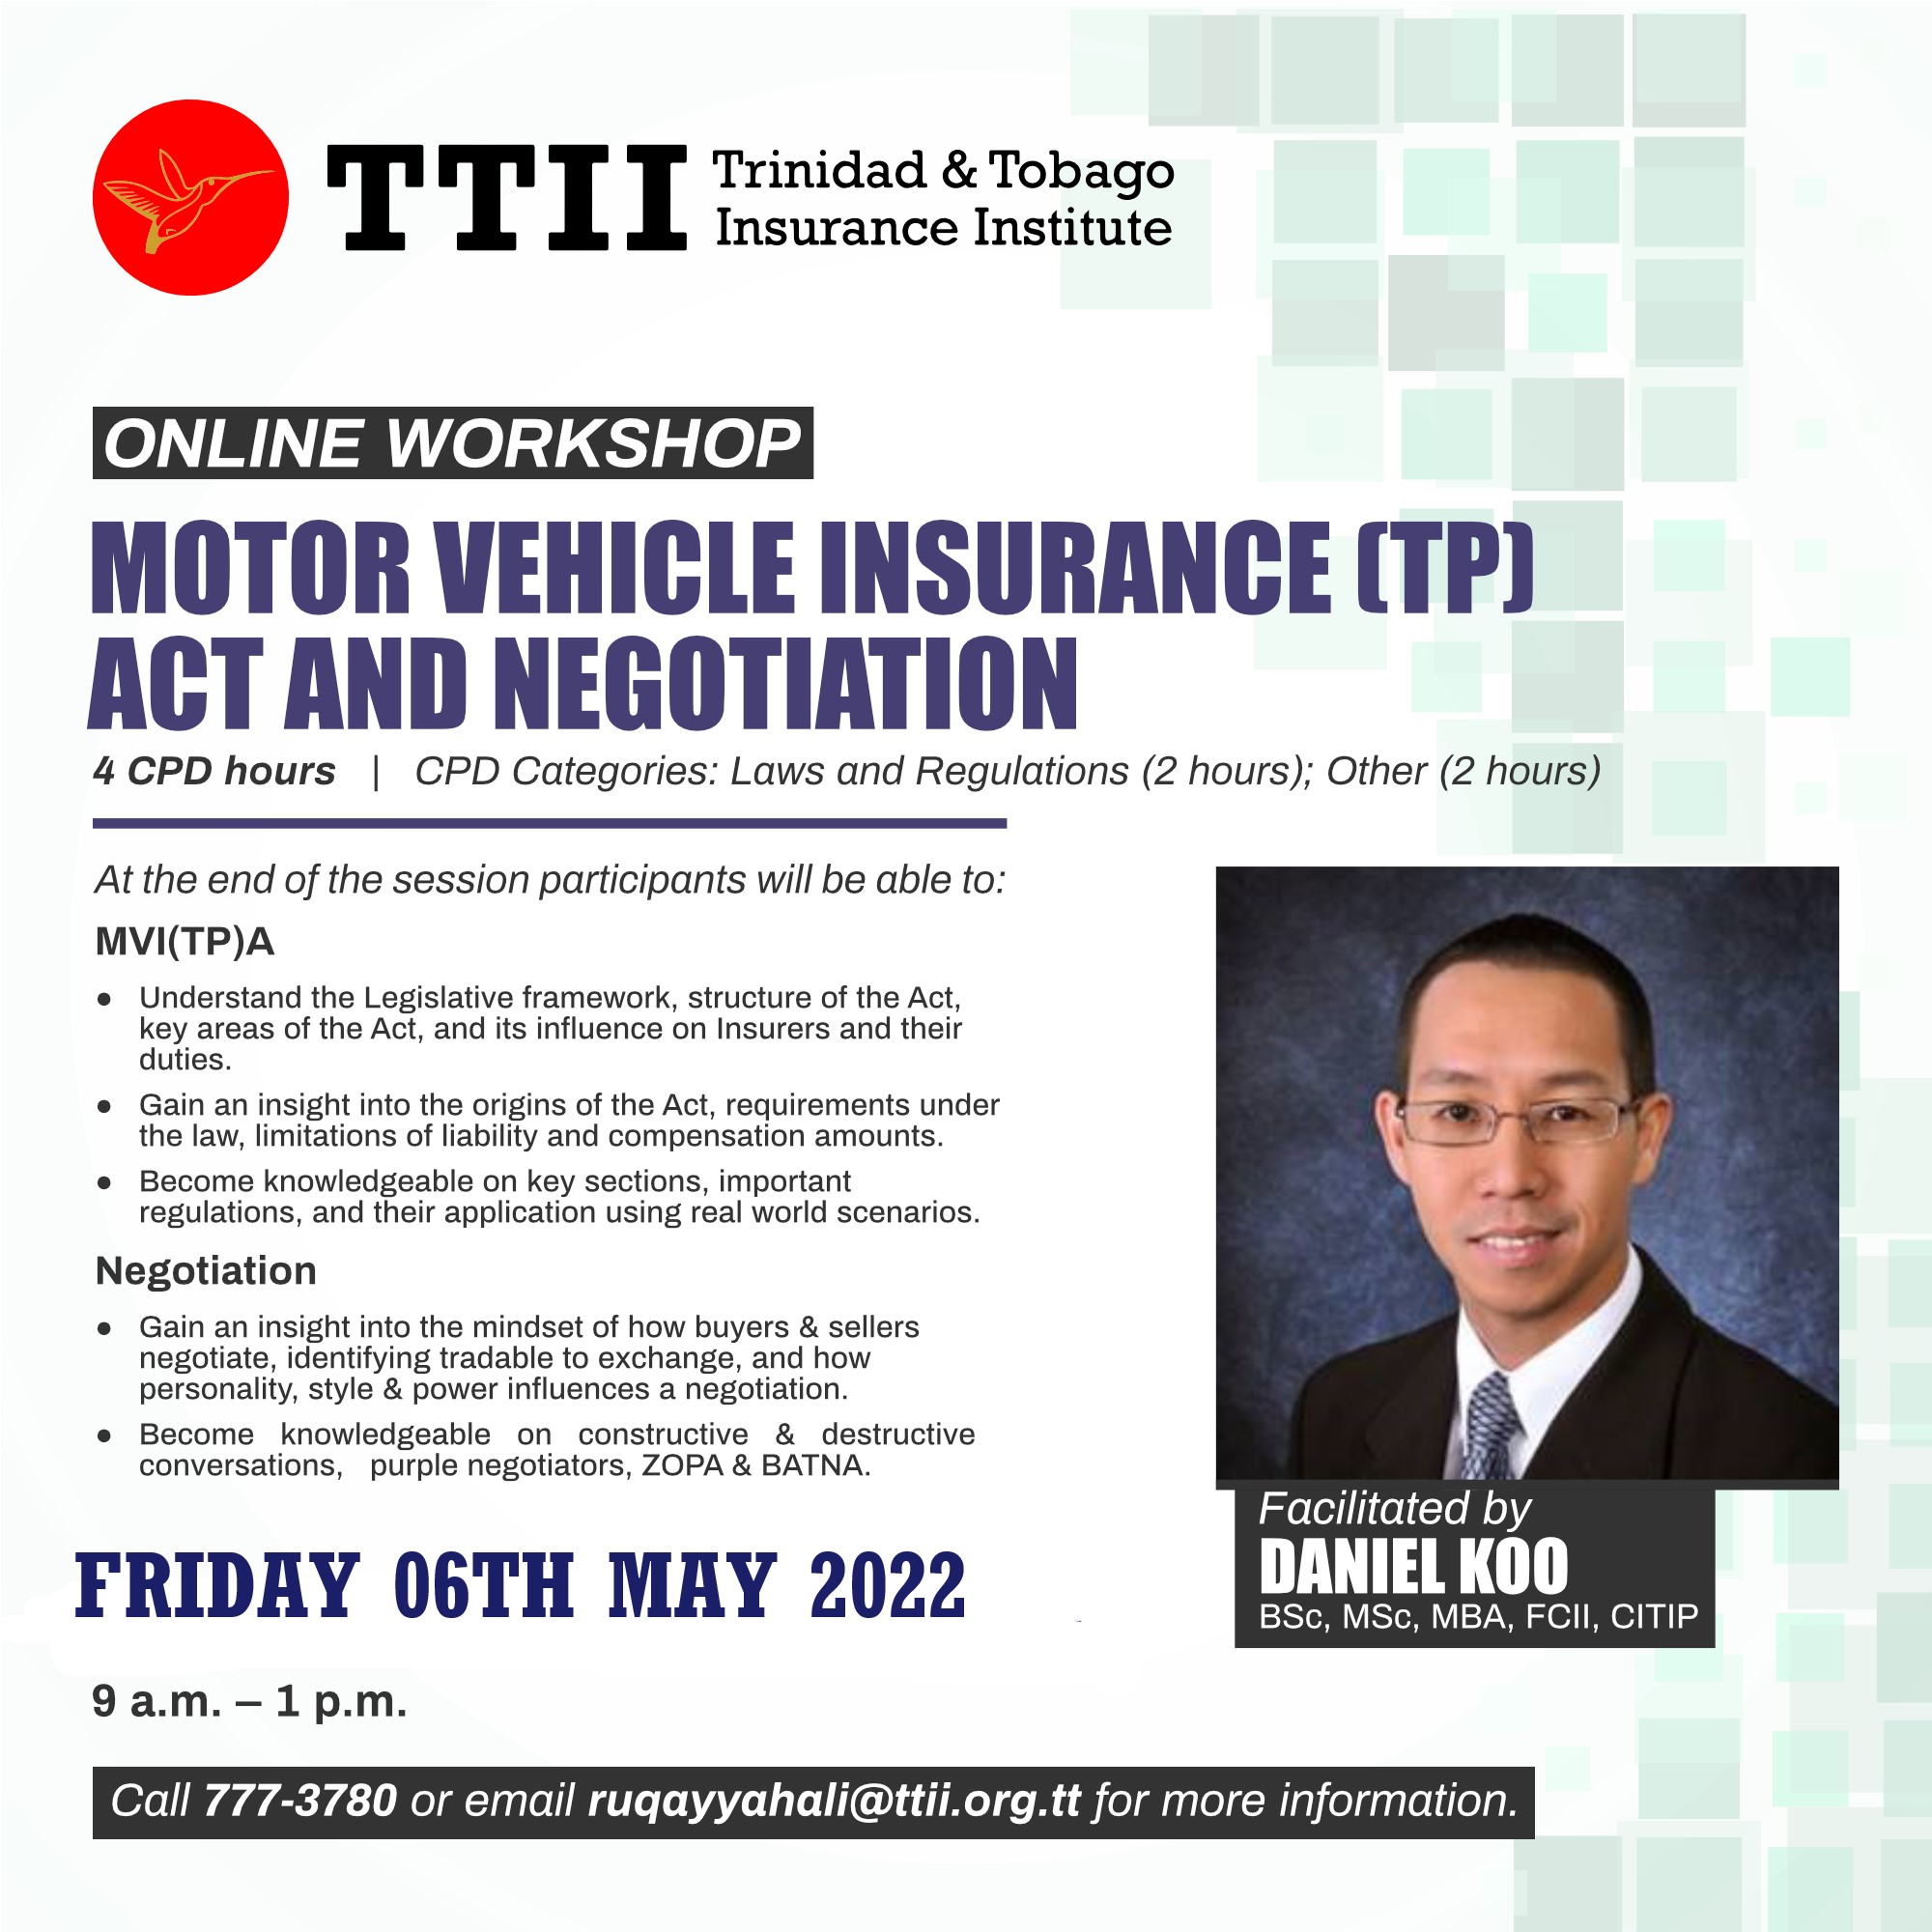 Motor Vehicle Insurance (TP) Act and Negotiation